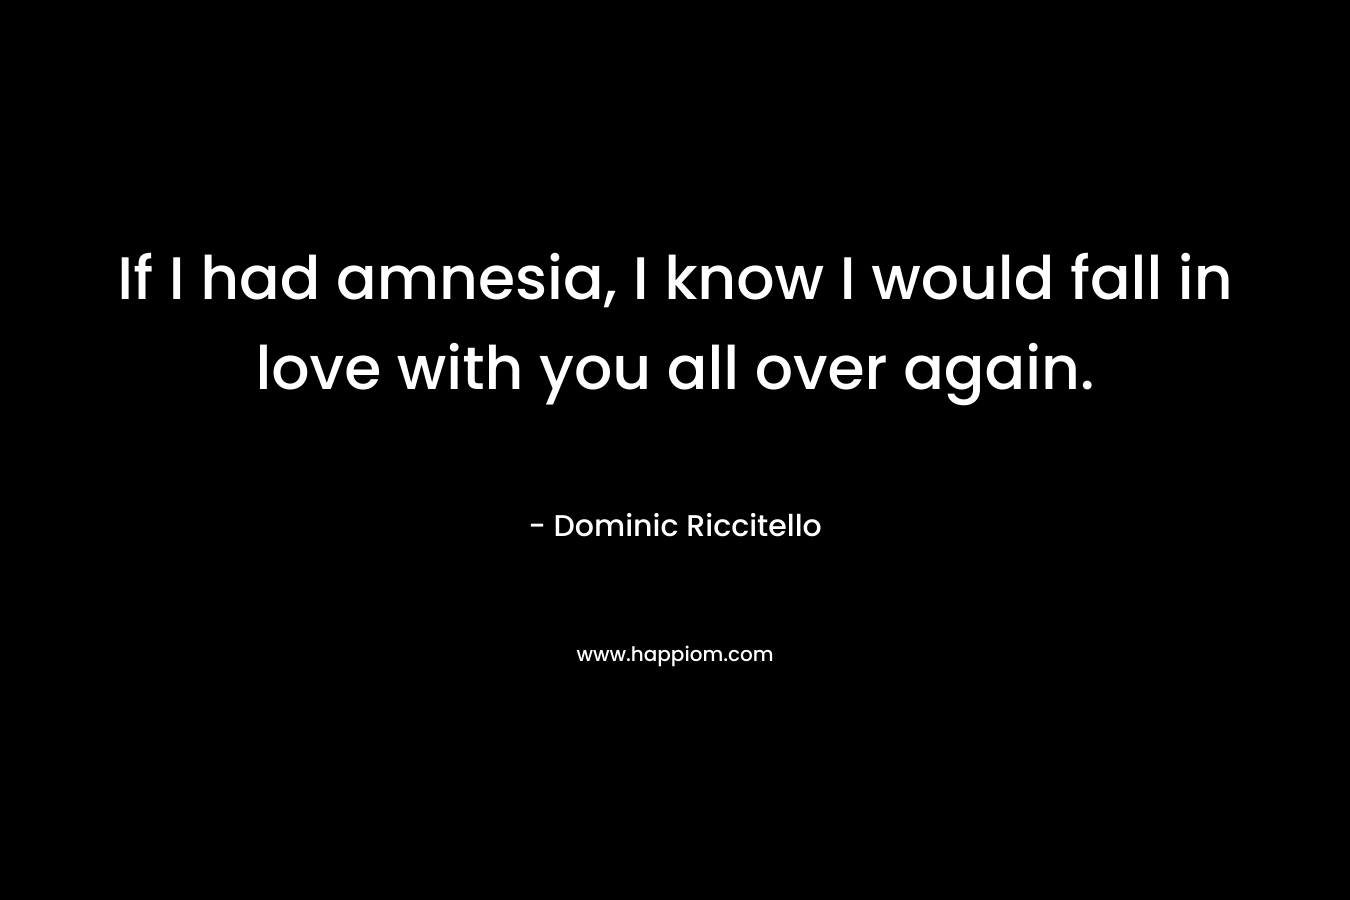 If I had amnesia, I know I would fall in love with you all over again.